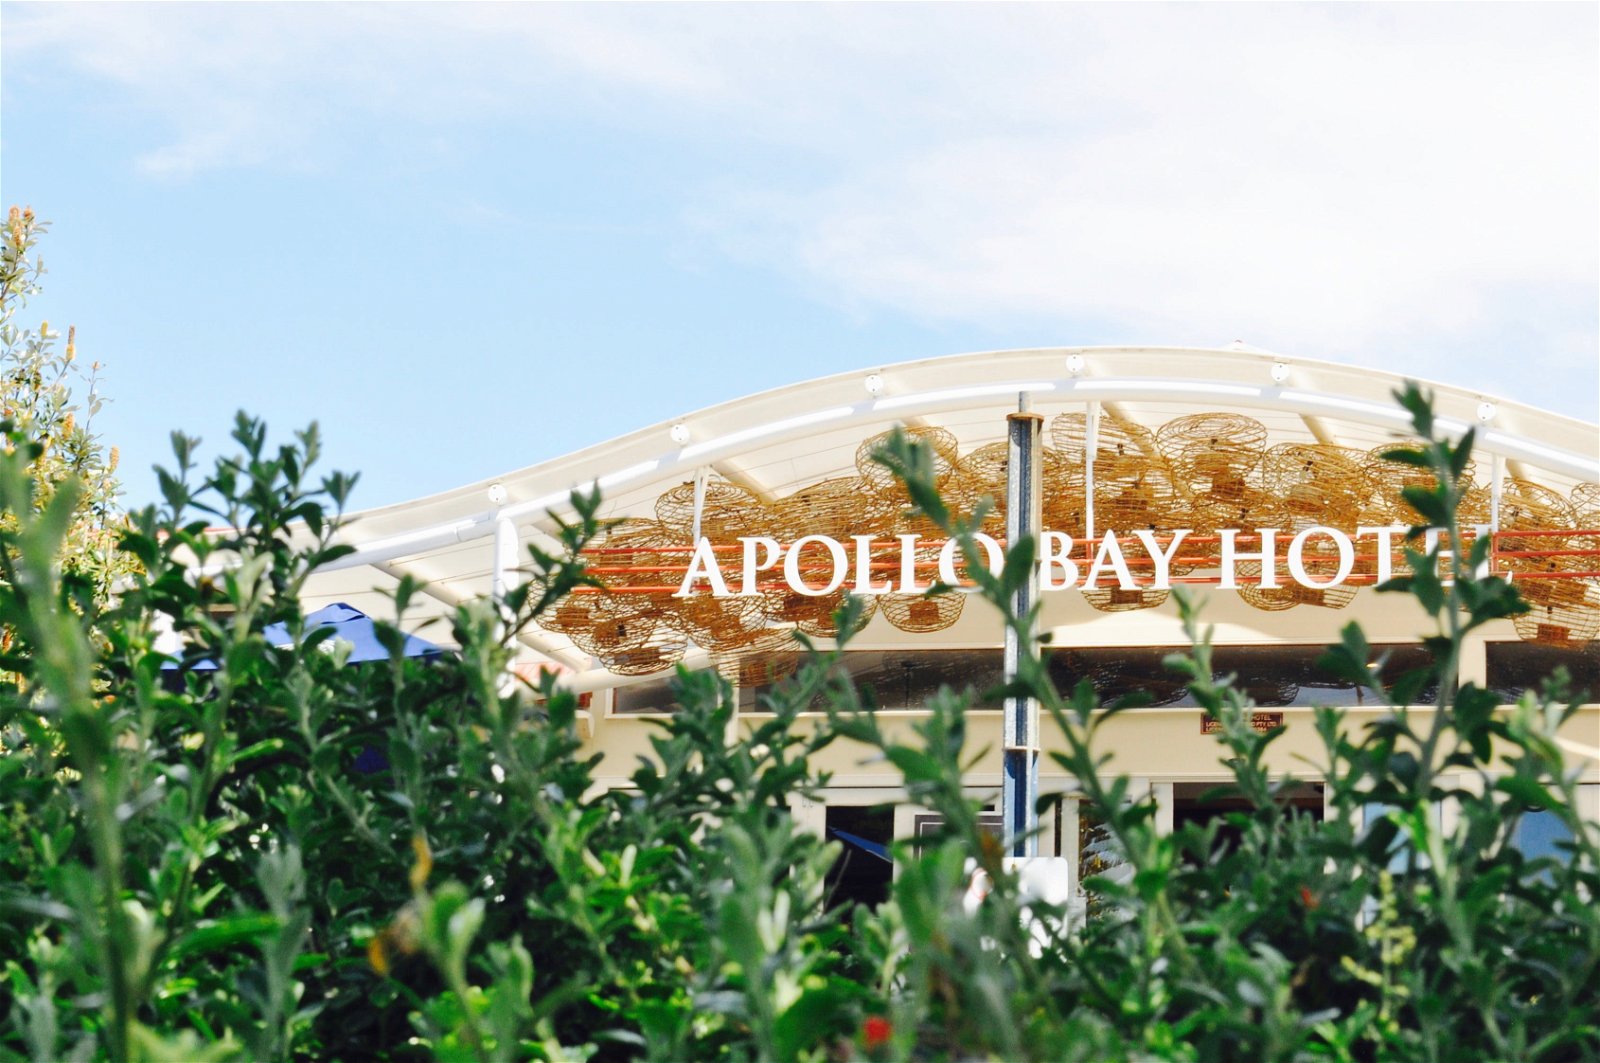 Apollo Bay Hotel - Northern Rivers Accommodation